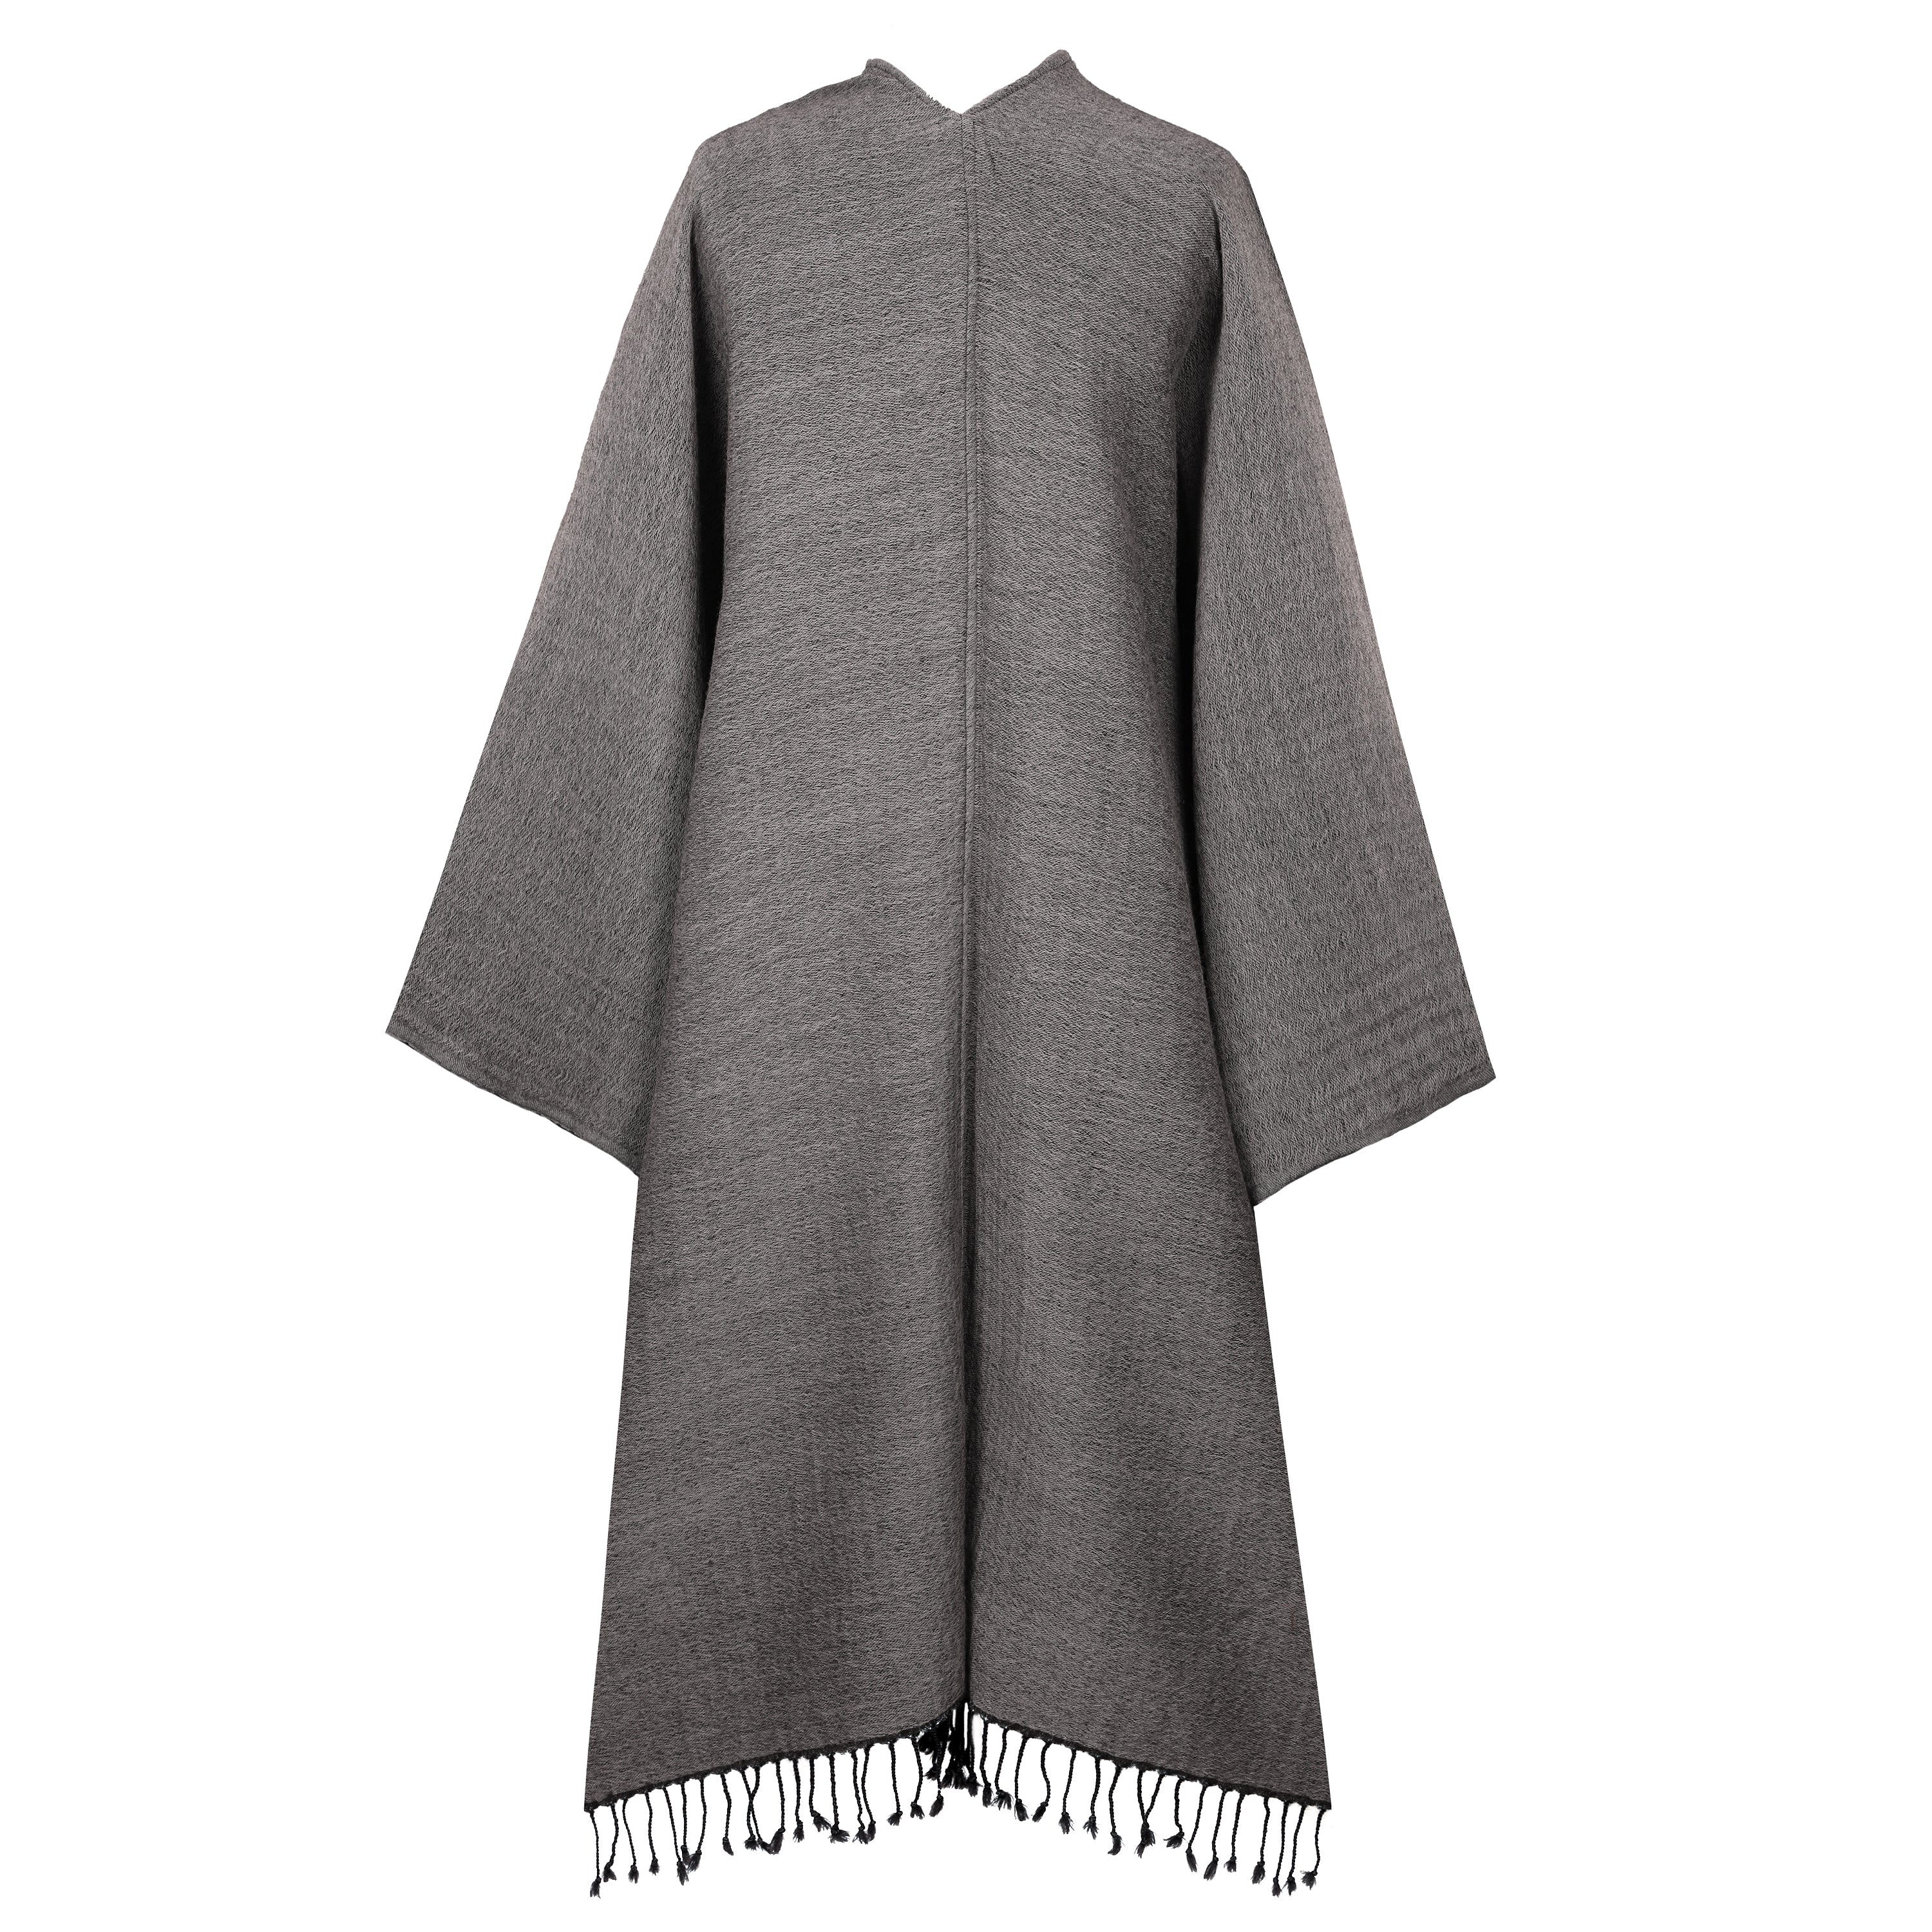 Grey Matter Boiled Wool Kimono Coat ONE OF A KIND